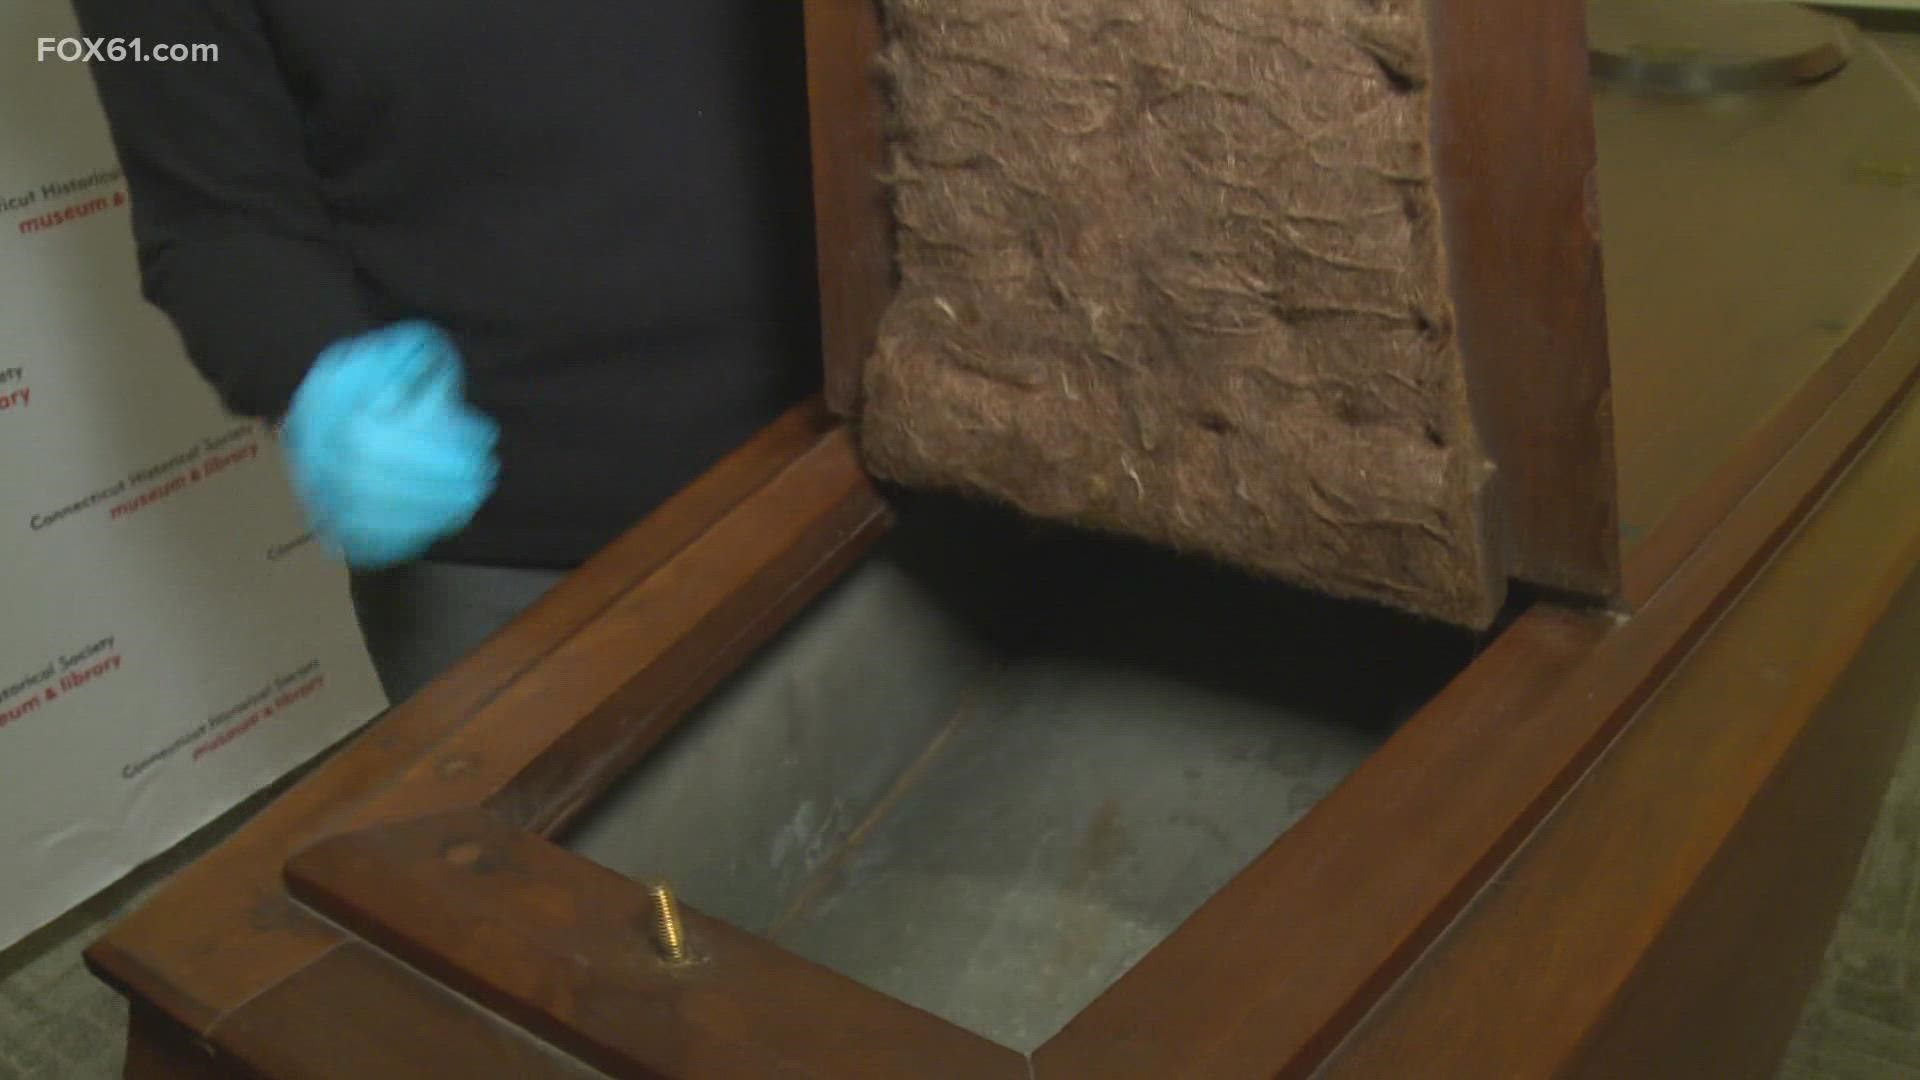 The corpse preserver was used at wakes during the late 1870s. UConn's Tech Park and The Connecticut Historical Society are breathing new life into the device.